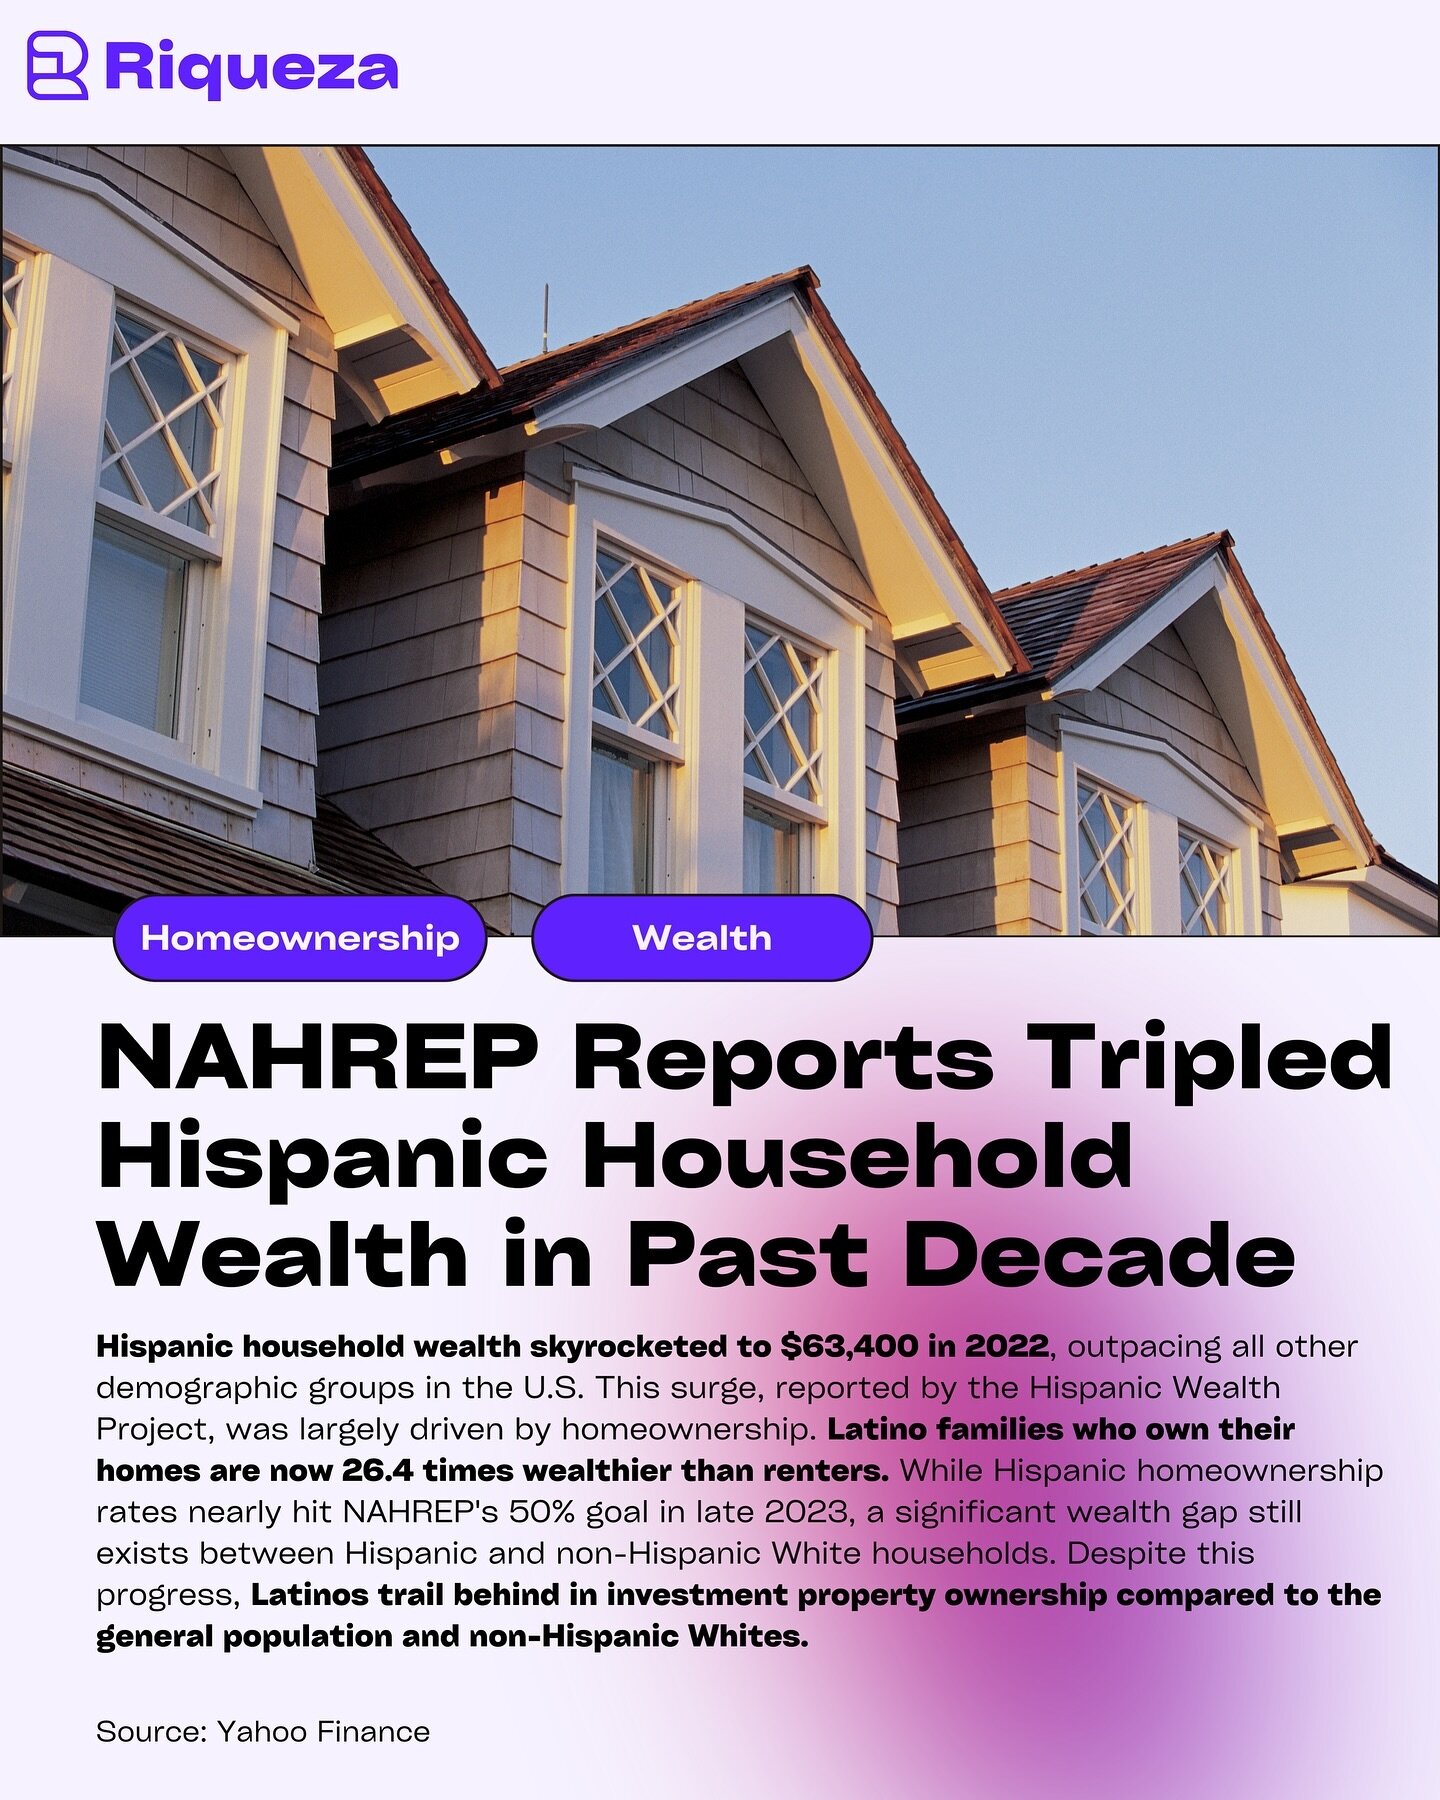 Hola Besties! Guess what? NAHREP just dropped some big news: Hispanic household wealth has tripled to $63,400 in 2022! 

🚀 Homeownership played a huge role, making Latino homeowners 26.4 times wealthier than renters. We&rsquo;re almost at NAHREP&rsq